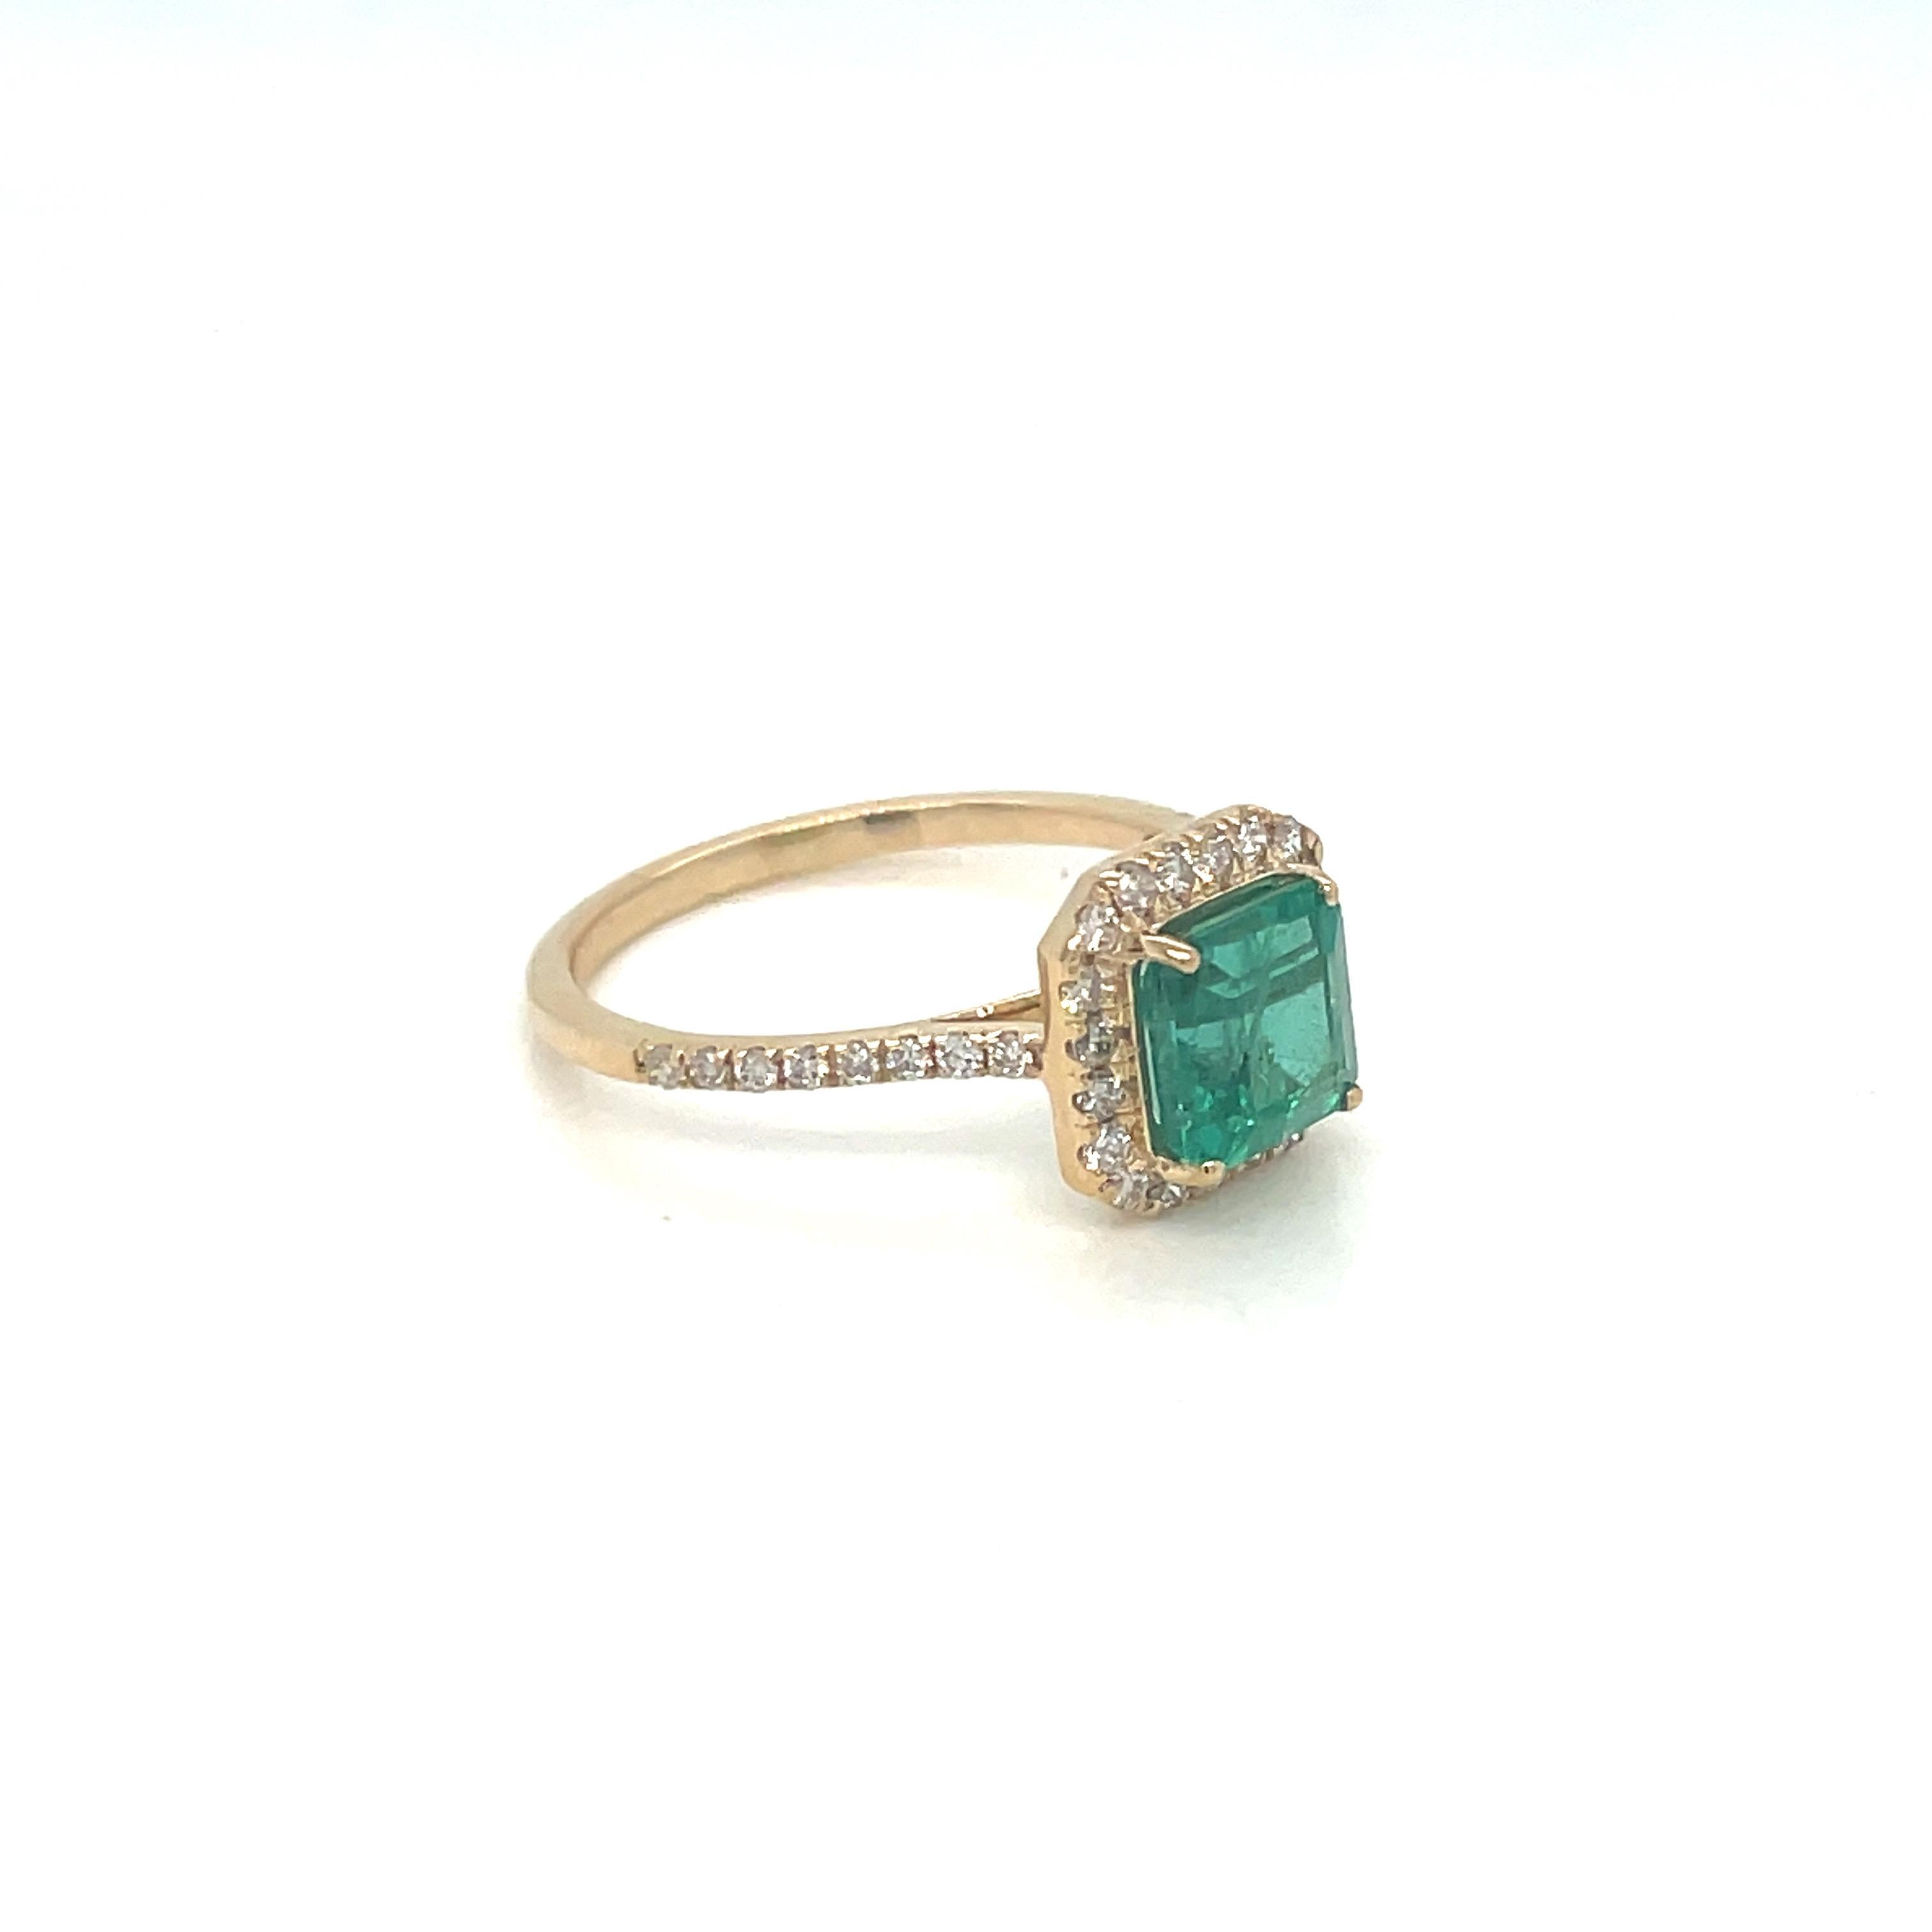 Octagon cut emerald gemstone beautifully crafted in a 10K yellow gold ring with natural diamonds.

With a vibrant green color hue. The birthstone for May is a symbol of renewed spring growth. Explore a vast range of precious stone Jewelry in our